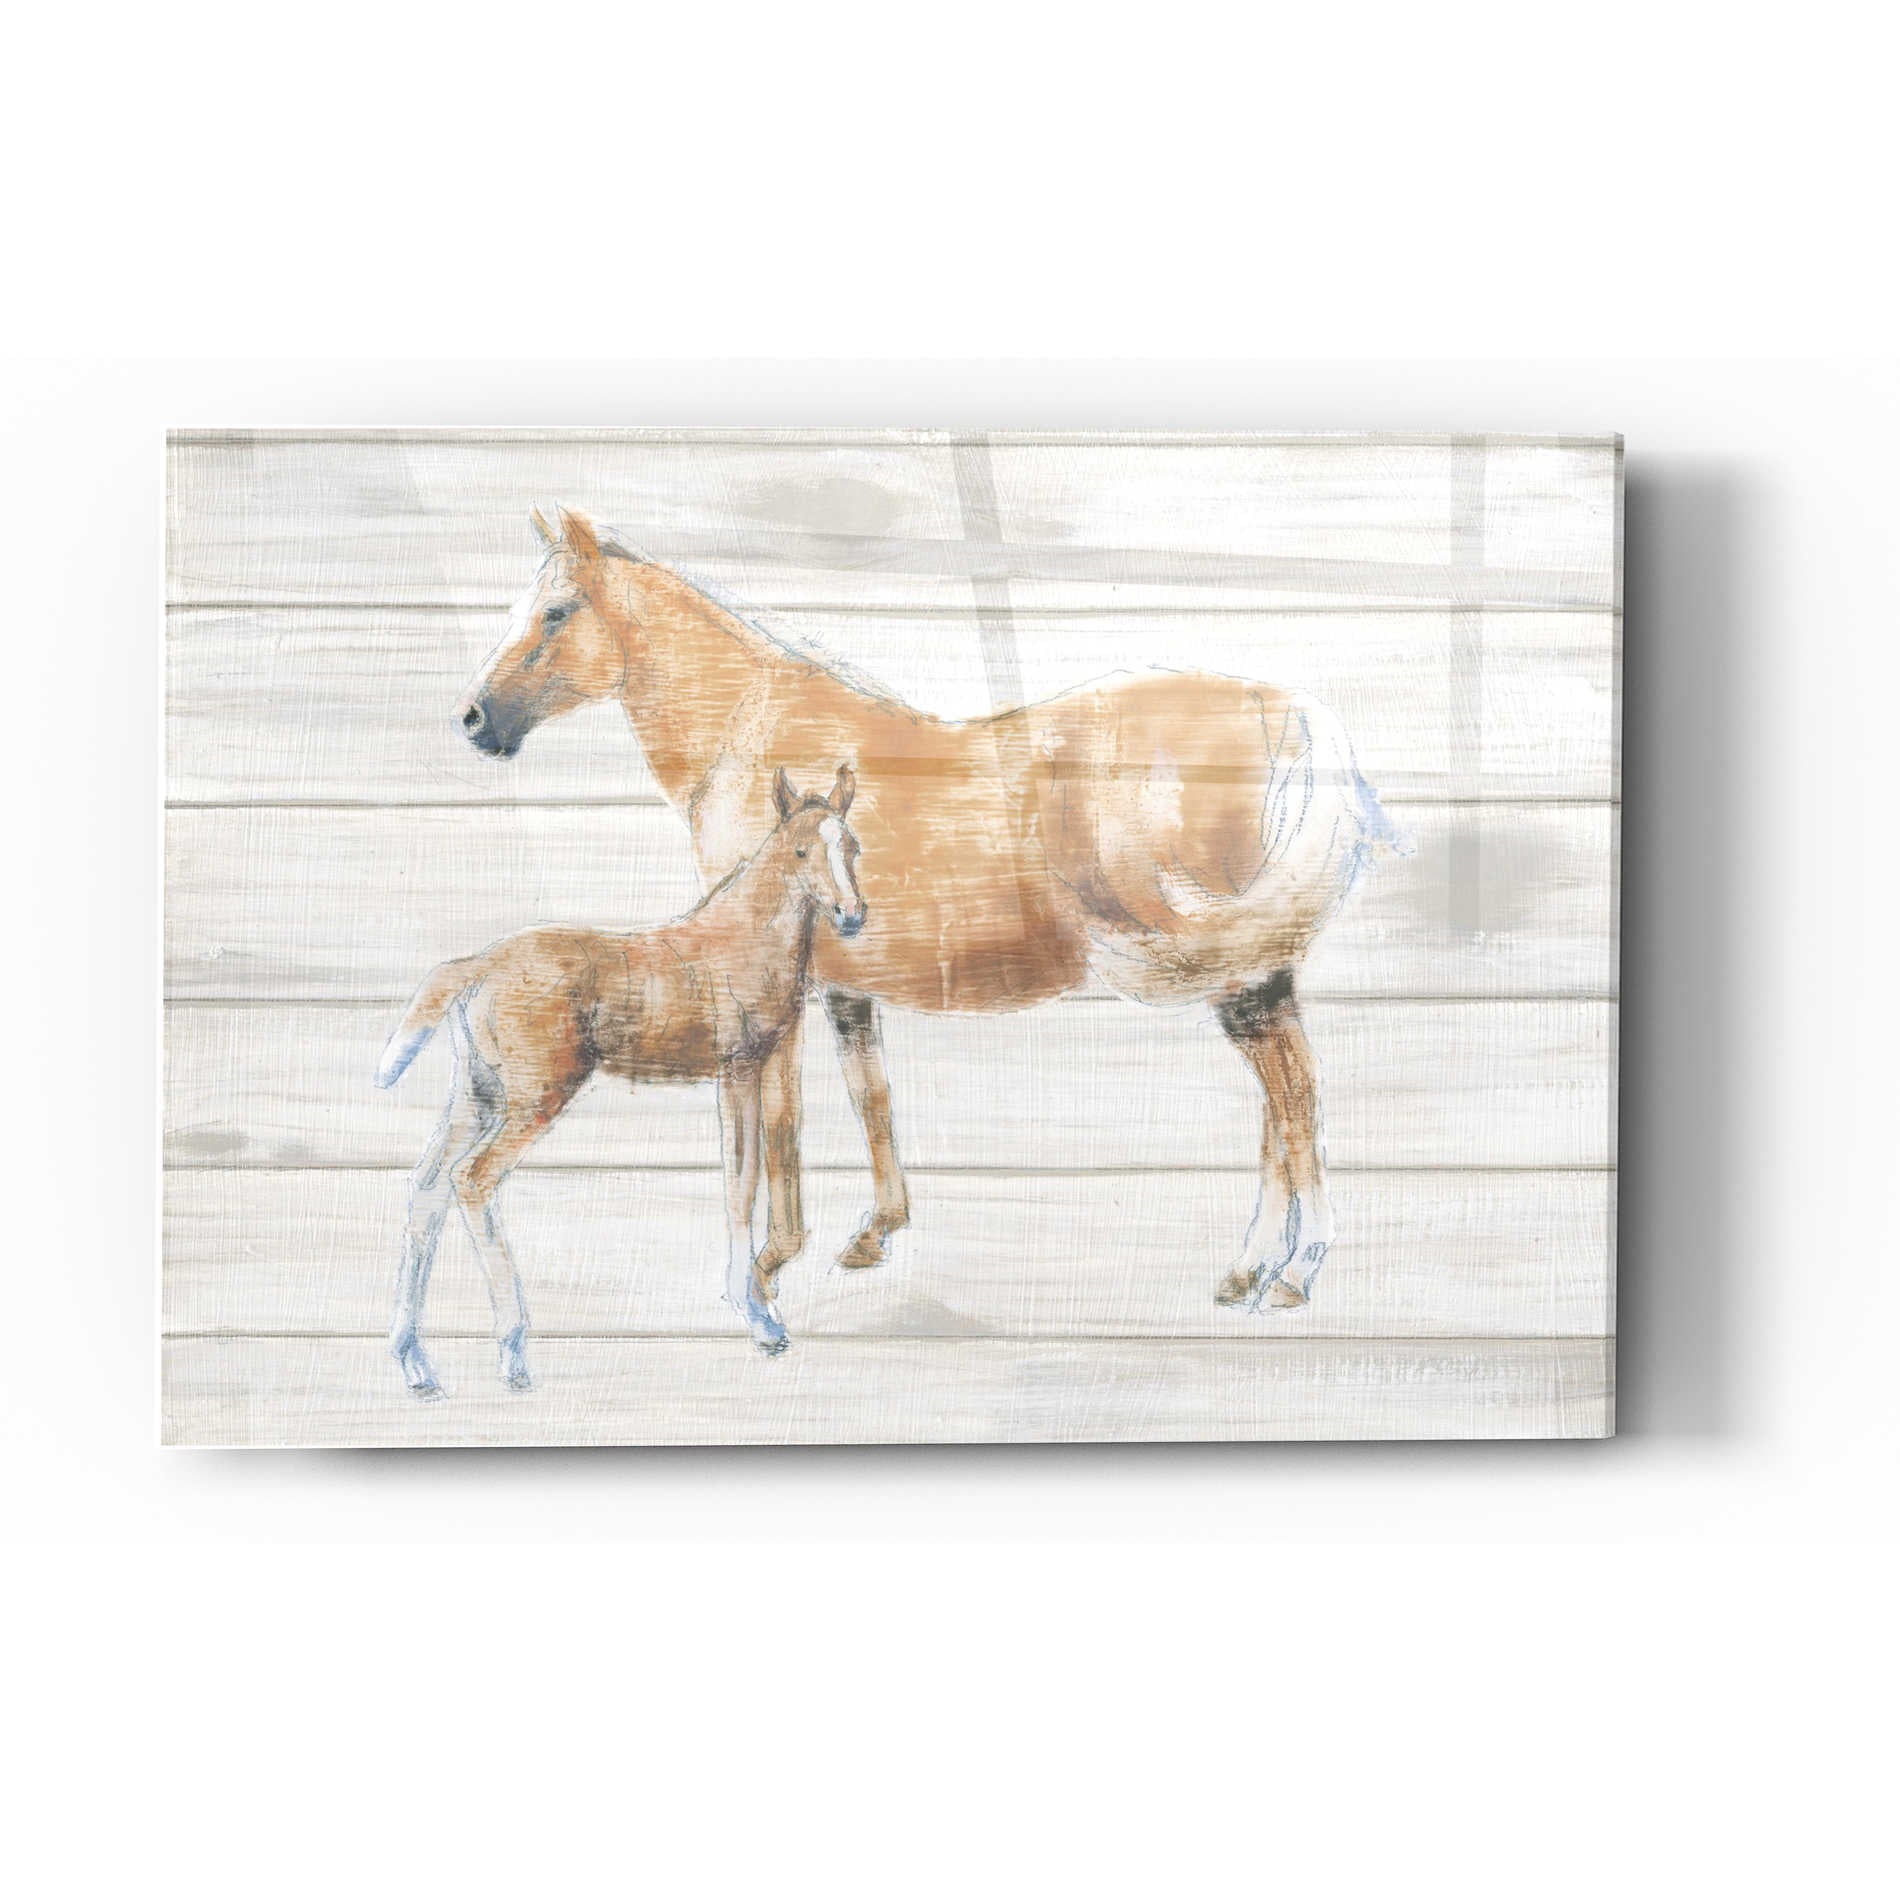 Epic Art 'Horse and Colt on Wood' by Emily Adams, Acrylic Glass Wall Art,24x36